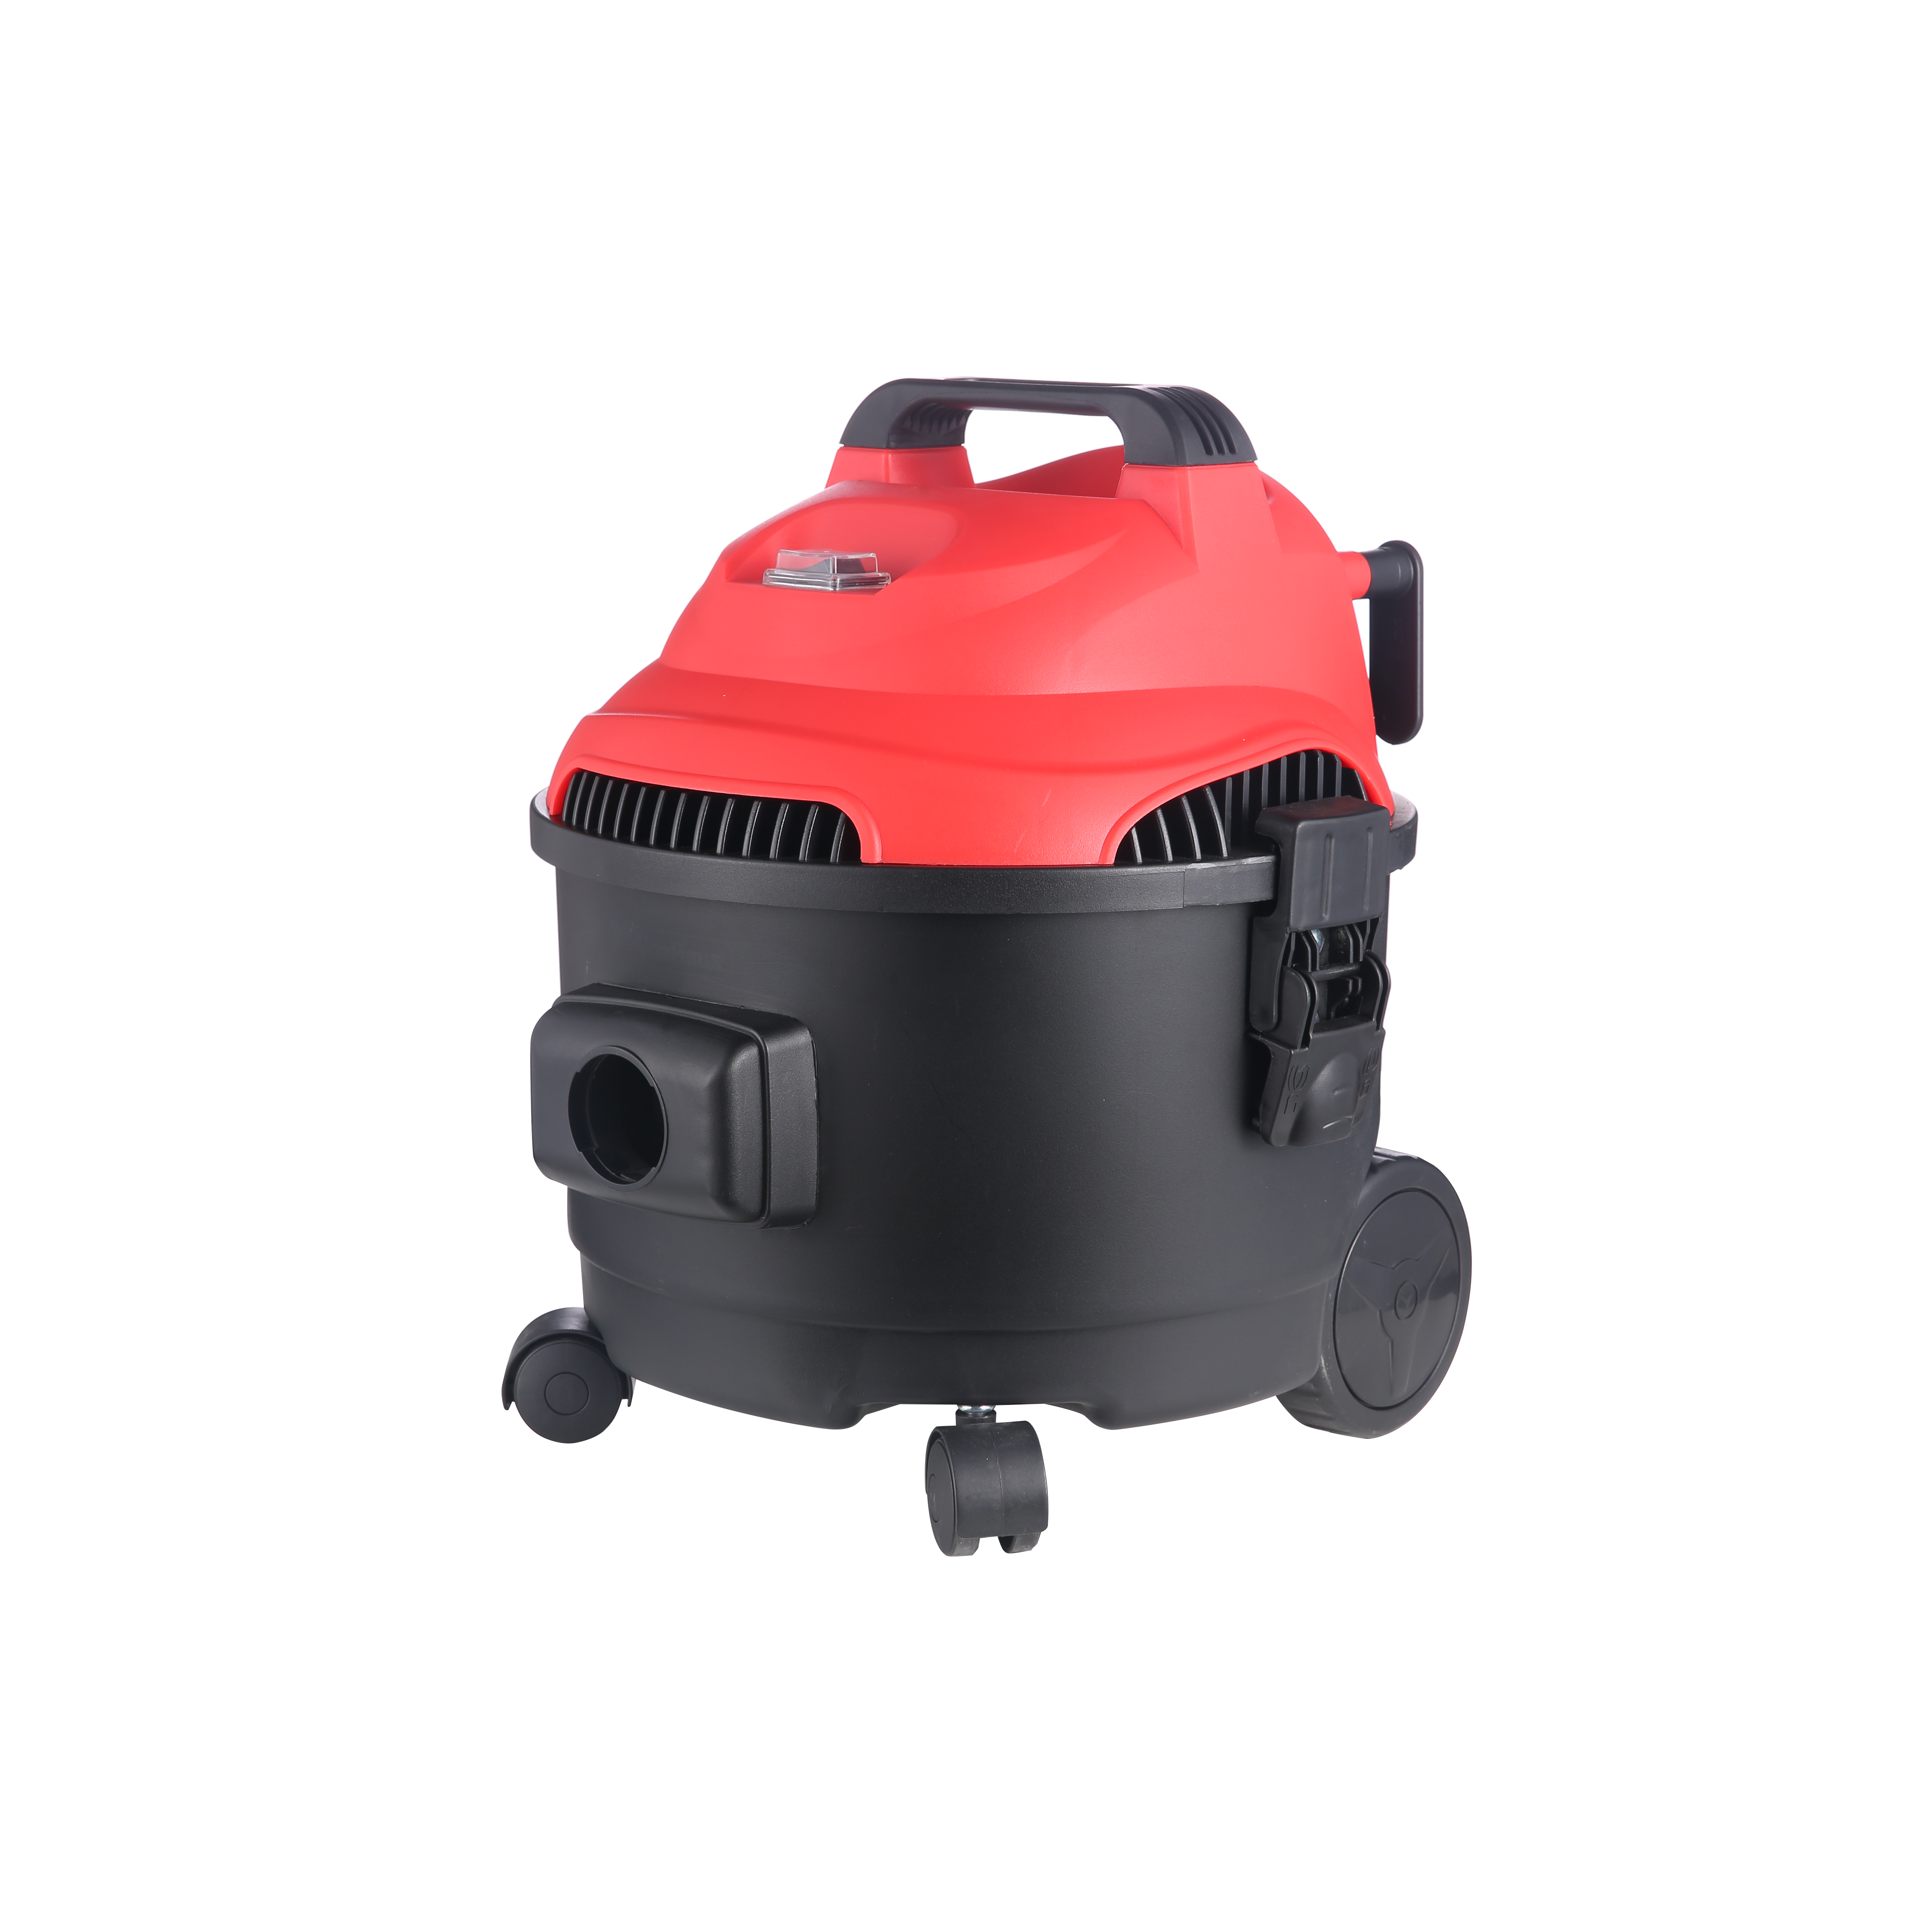 RL128 portable efficient large suction ABS handheld vacuum cleaner